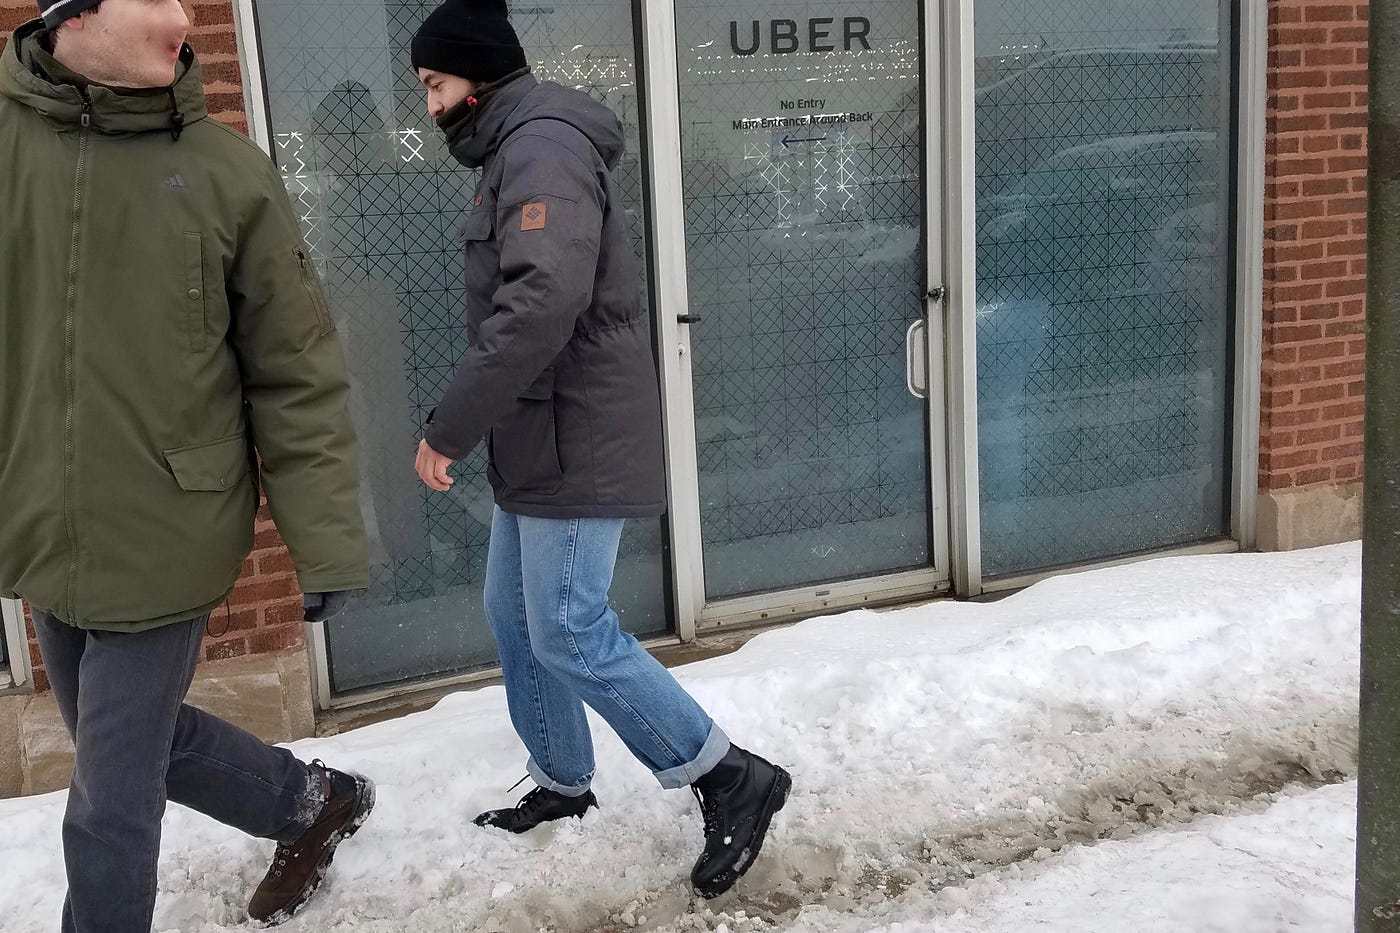 Uber's Landlord Stiffed Laborers For Work On Driver Support Center  Buildout: Records | by Alisa Hauser | The Pipeline | Medium